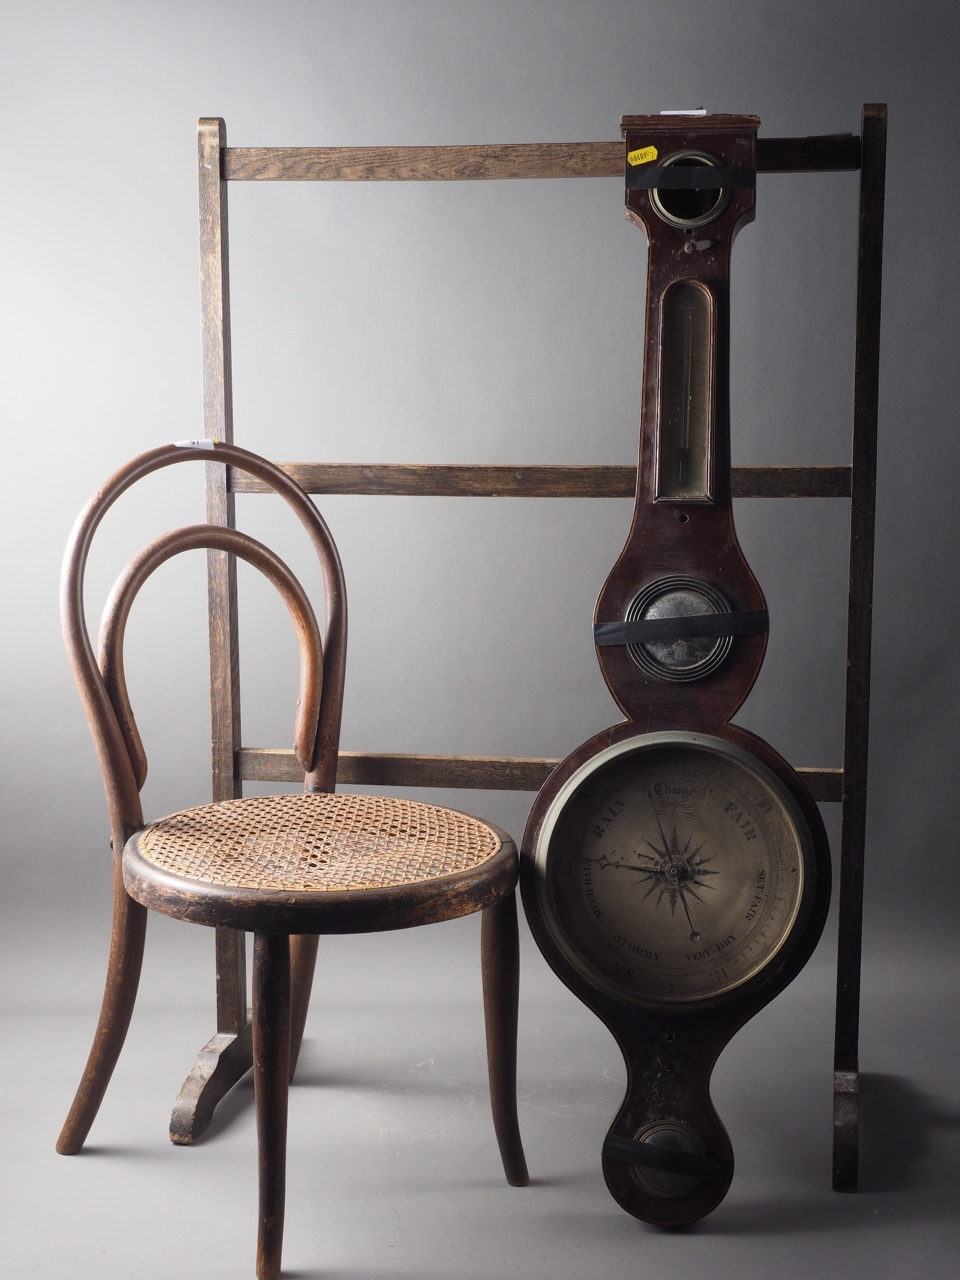 An Edwardian mahogany and line inlaid barometer (numerous losses and damages), a child's bentwood